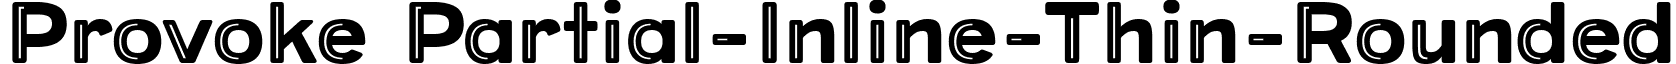 Provoke Partial-Inline-Thin-Rounded font - Provoke-Partial-Inline-Thin-Rounded.ttf